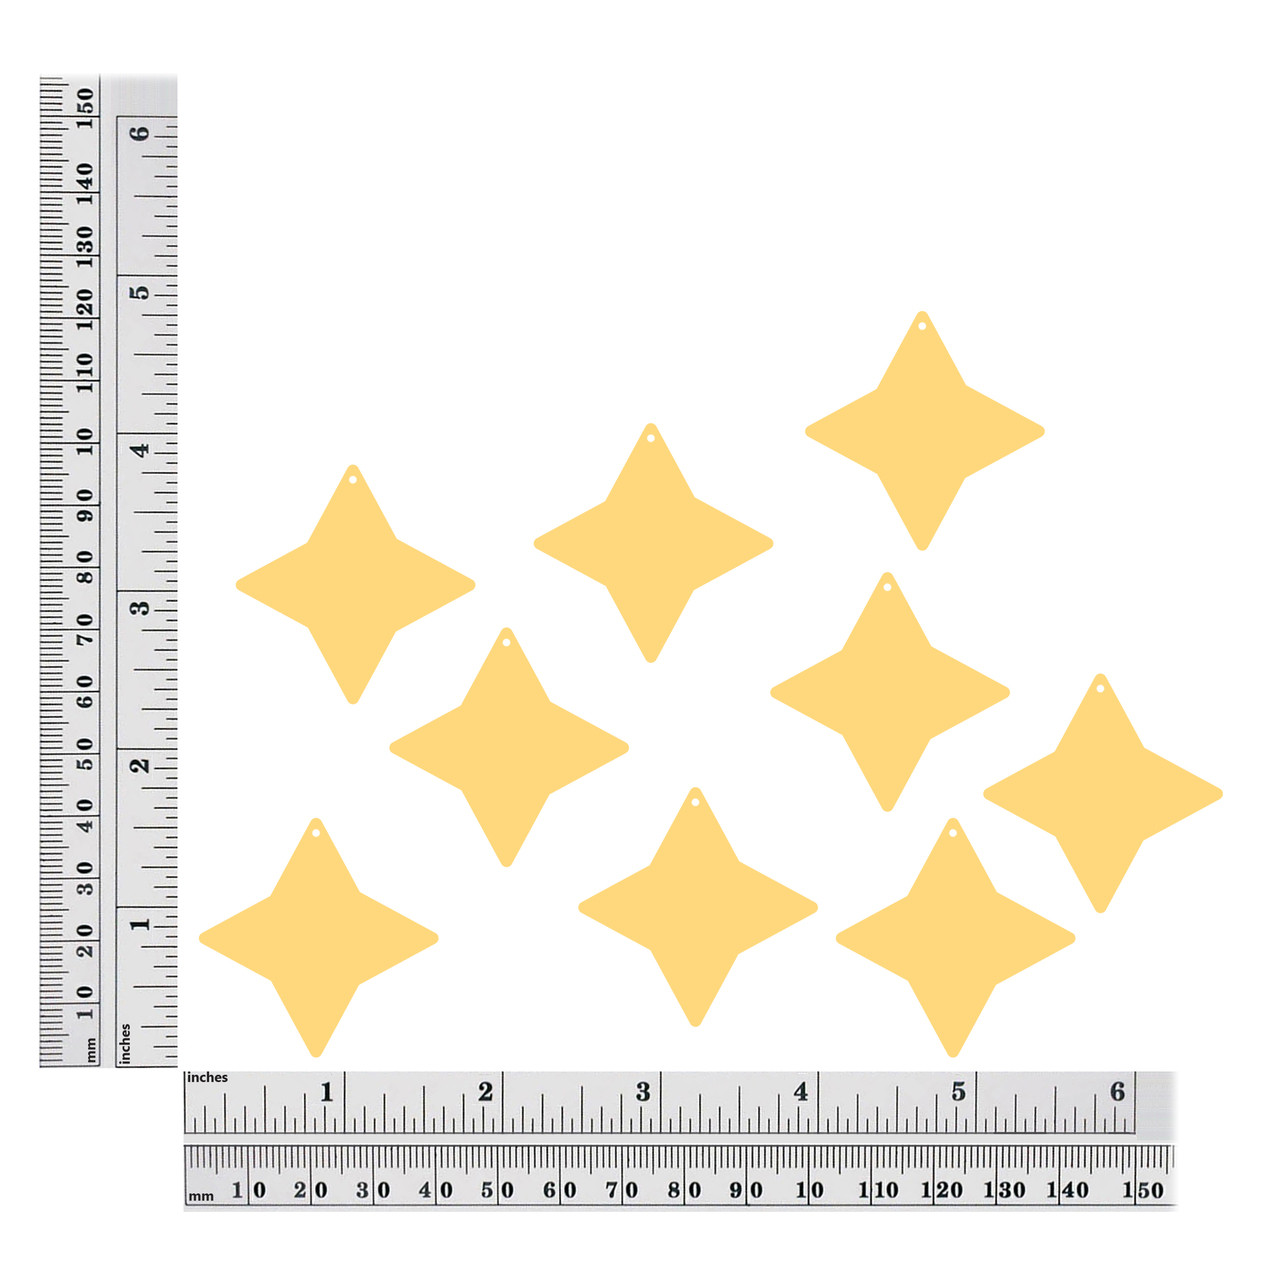 1.5 inch 4 point star sequin size chart